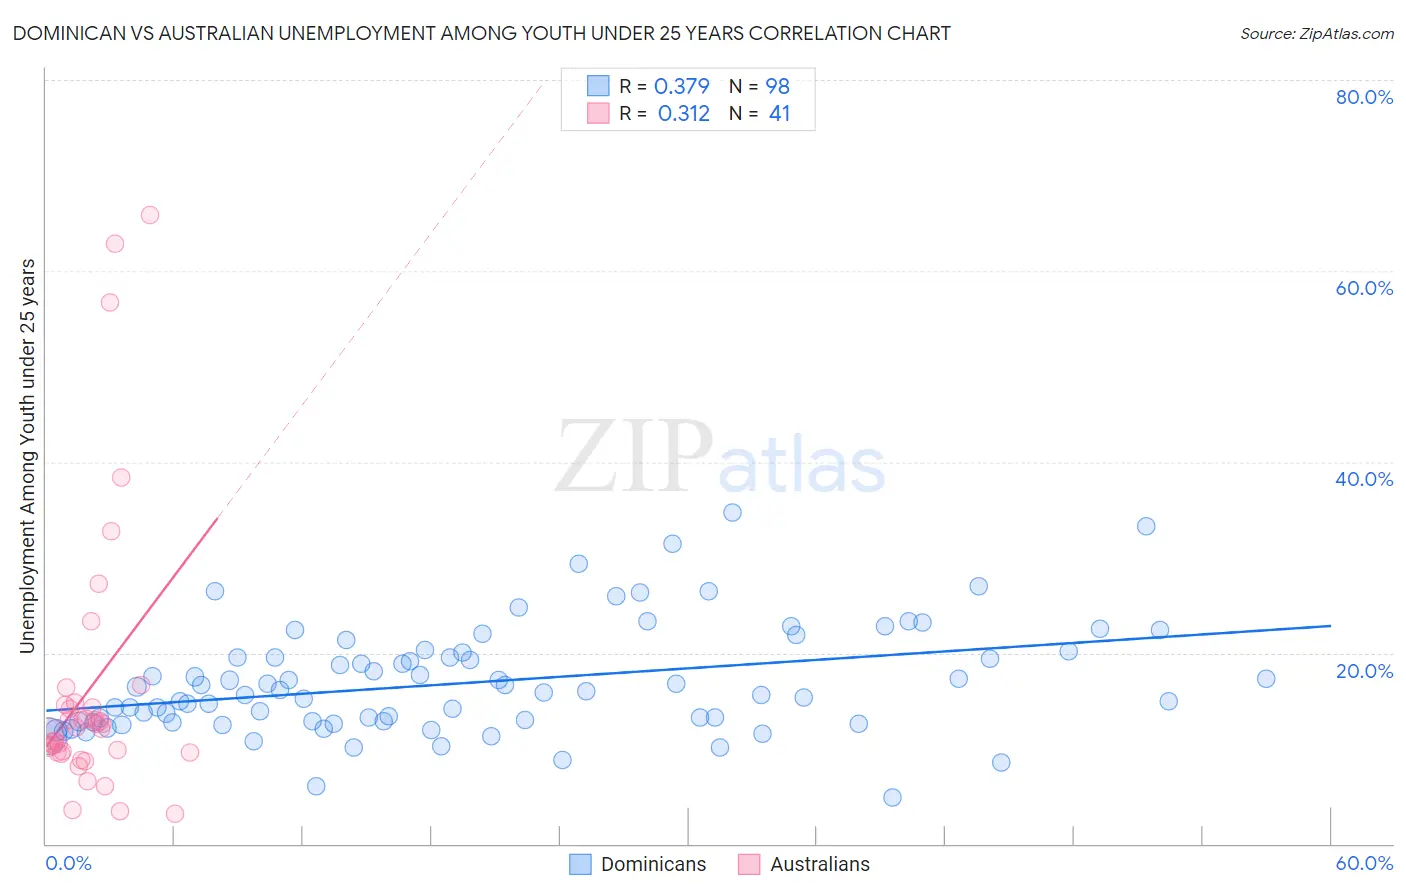 Dominican vs Australian Unemployment Among Youth under 25 years